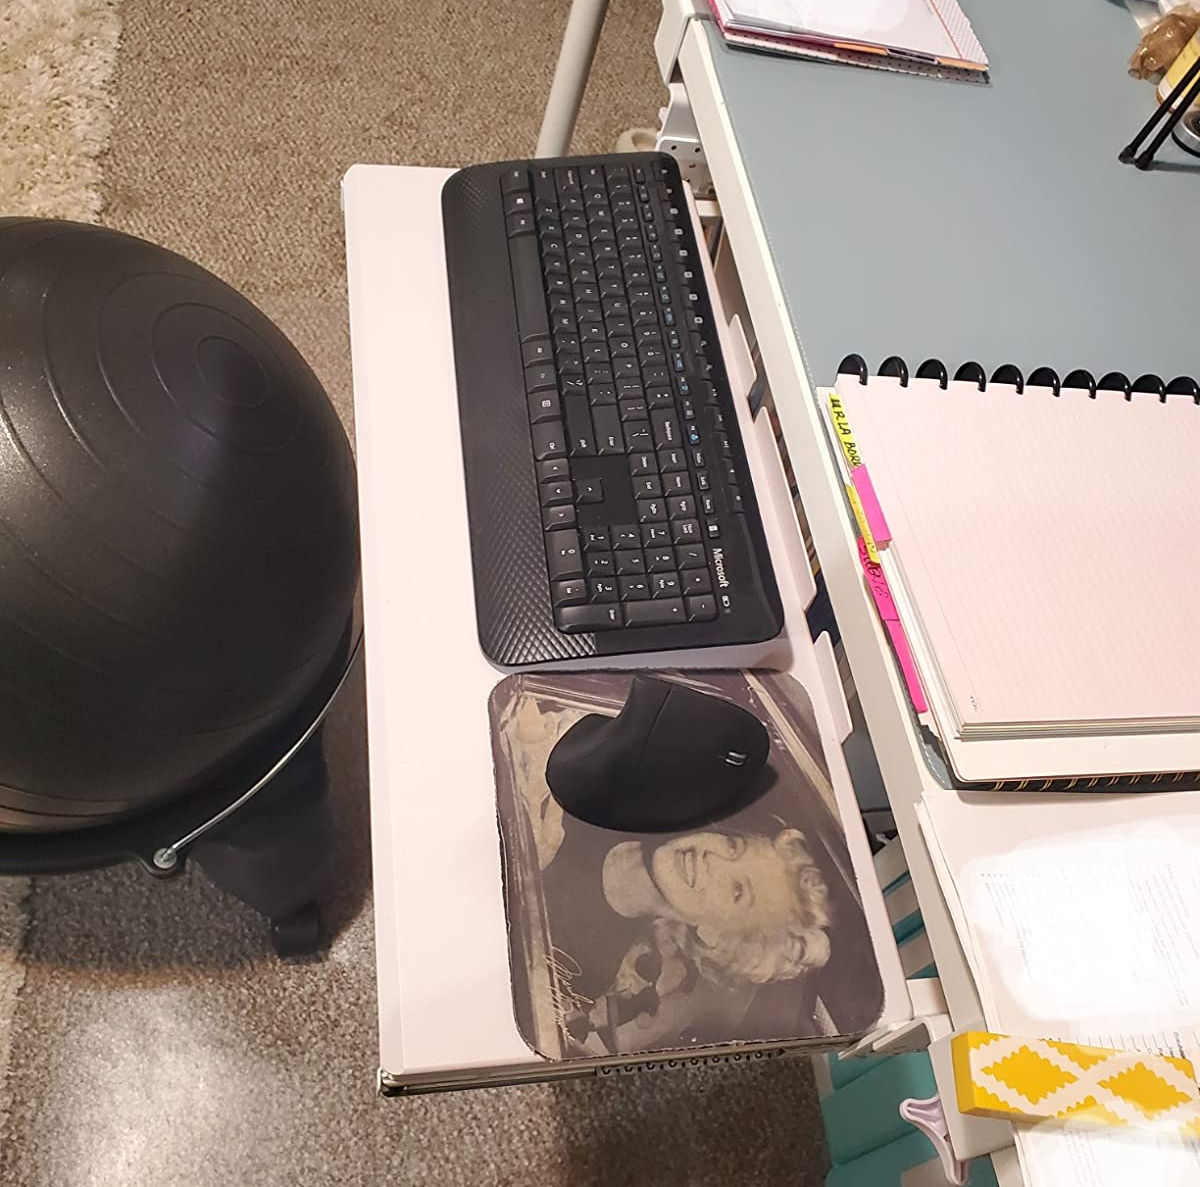 the keyboard tray attached to a reviewer's desk, holding a keyboard, mouse, and mouse pad